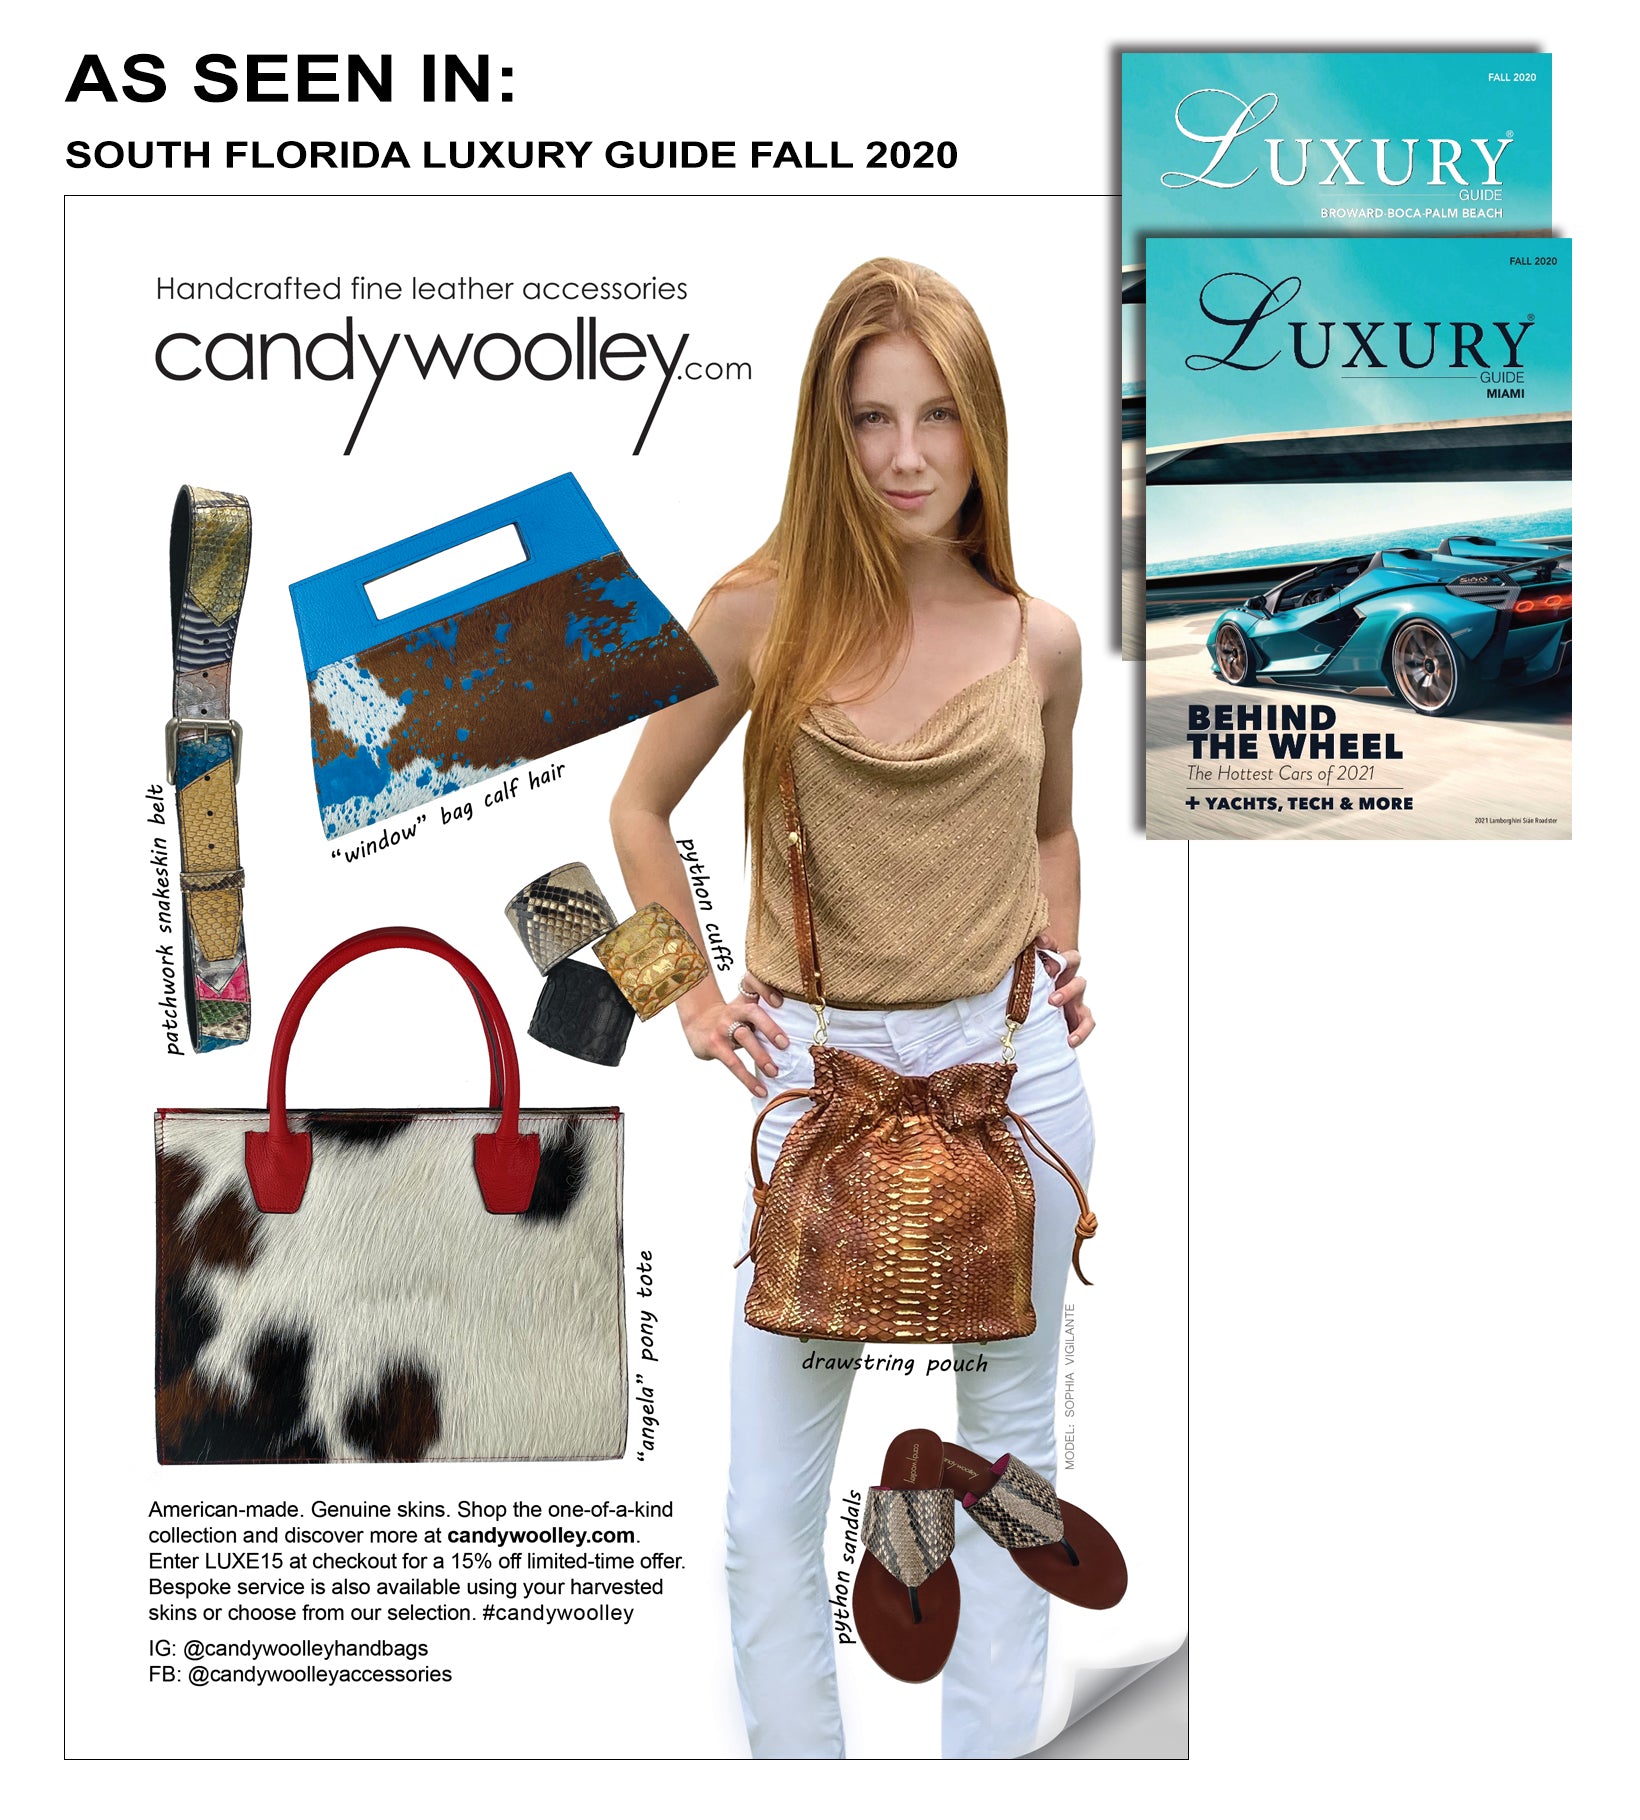 FEATURED ON SOUTH FLORIDA LUXURY GUIDE - FALL 2020